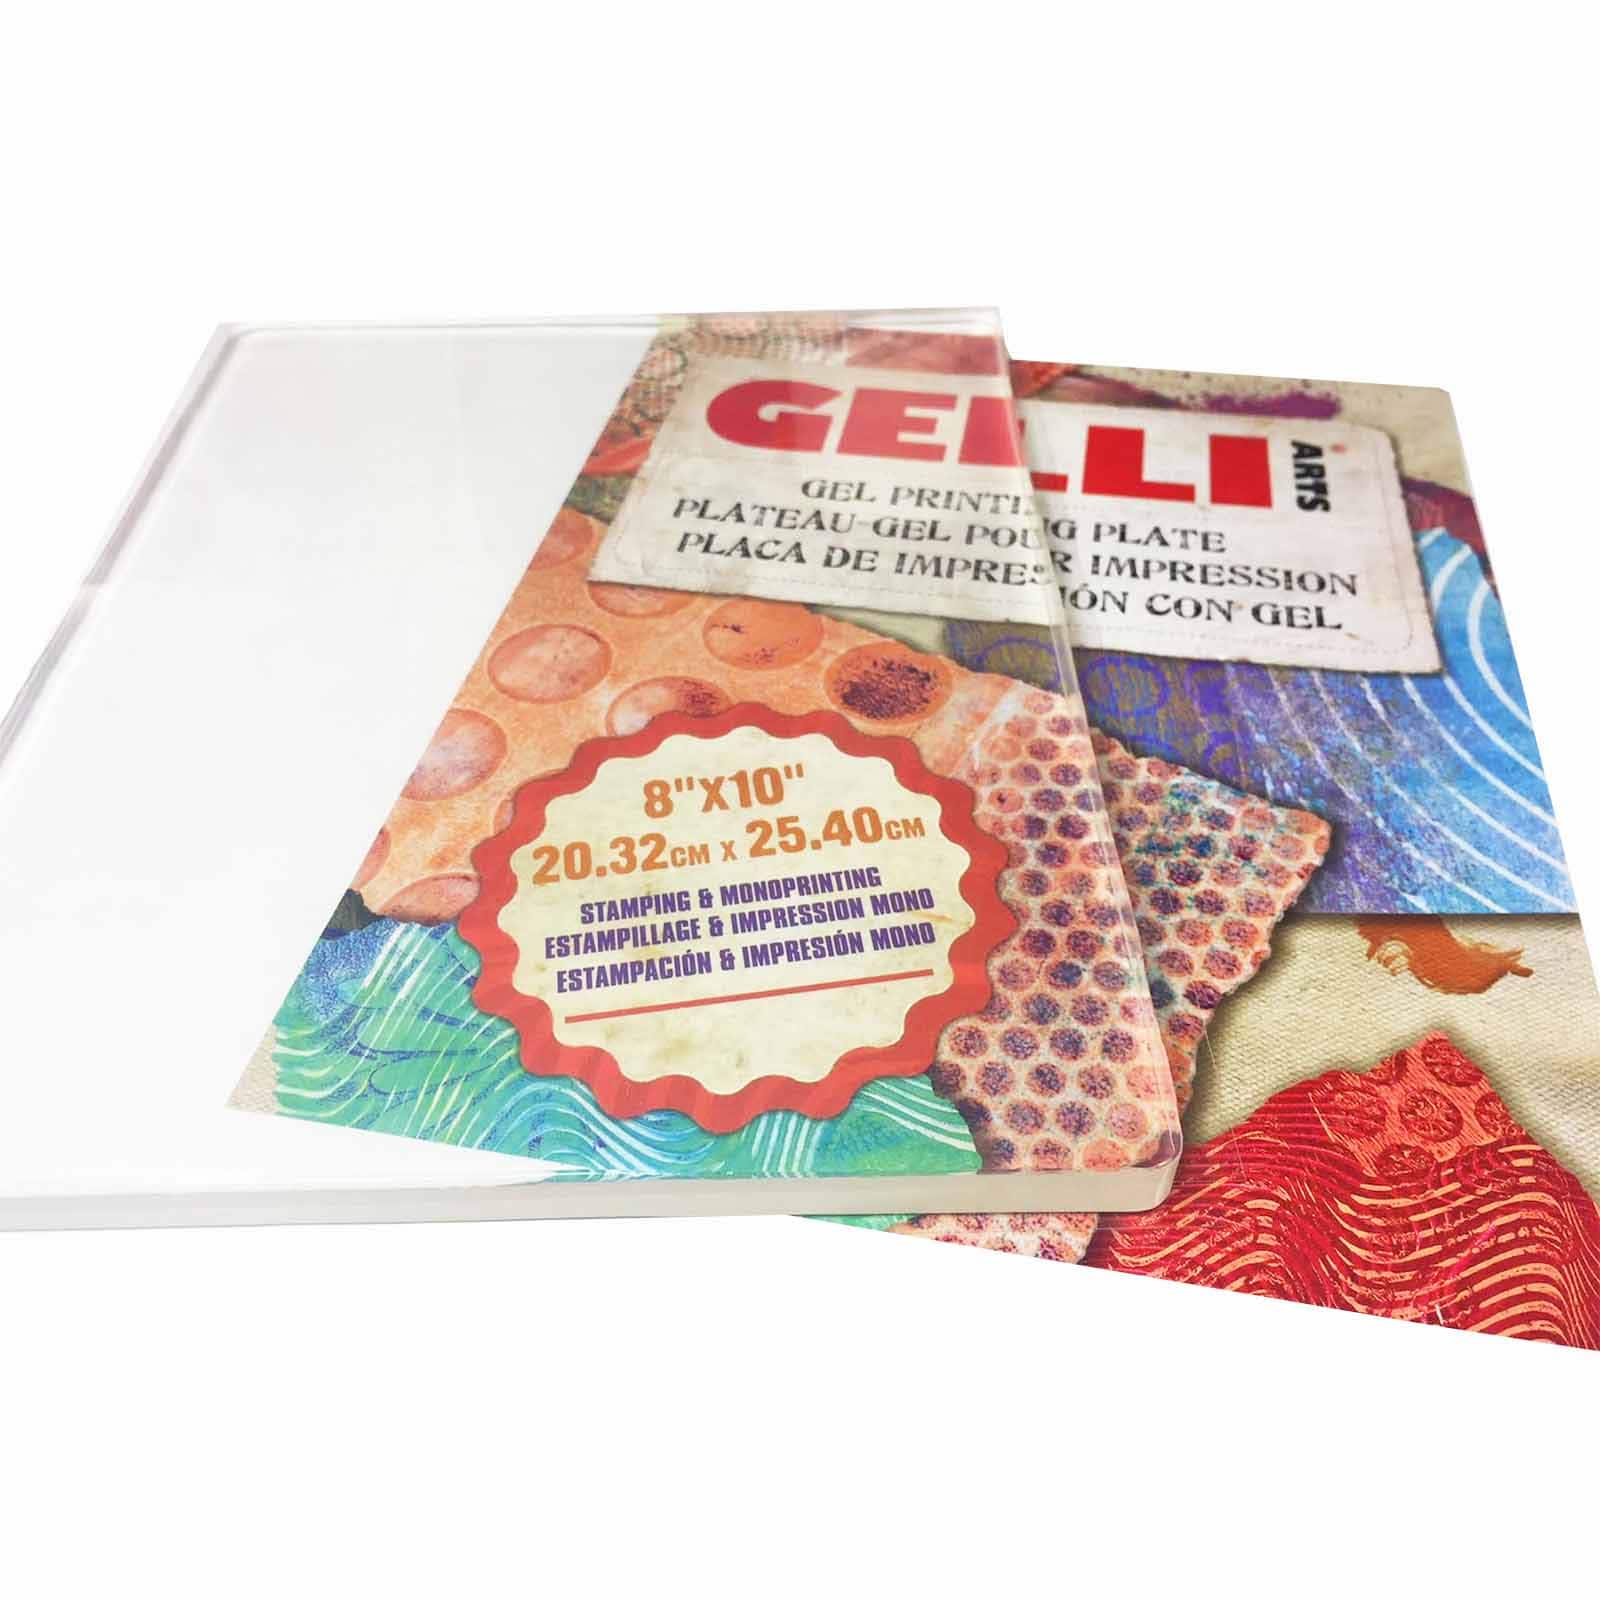 Layered Gel Printing with the Gelli Arts® Mini Placement Tool, Classes